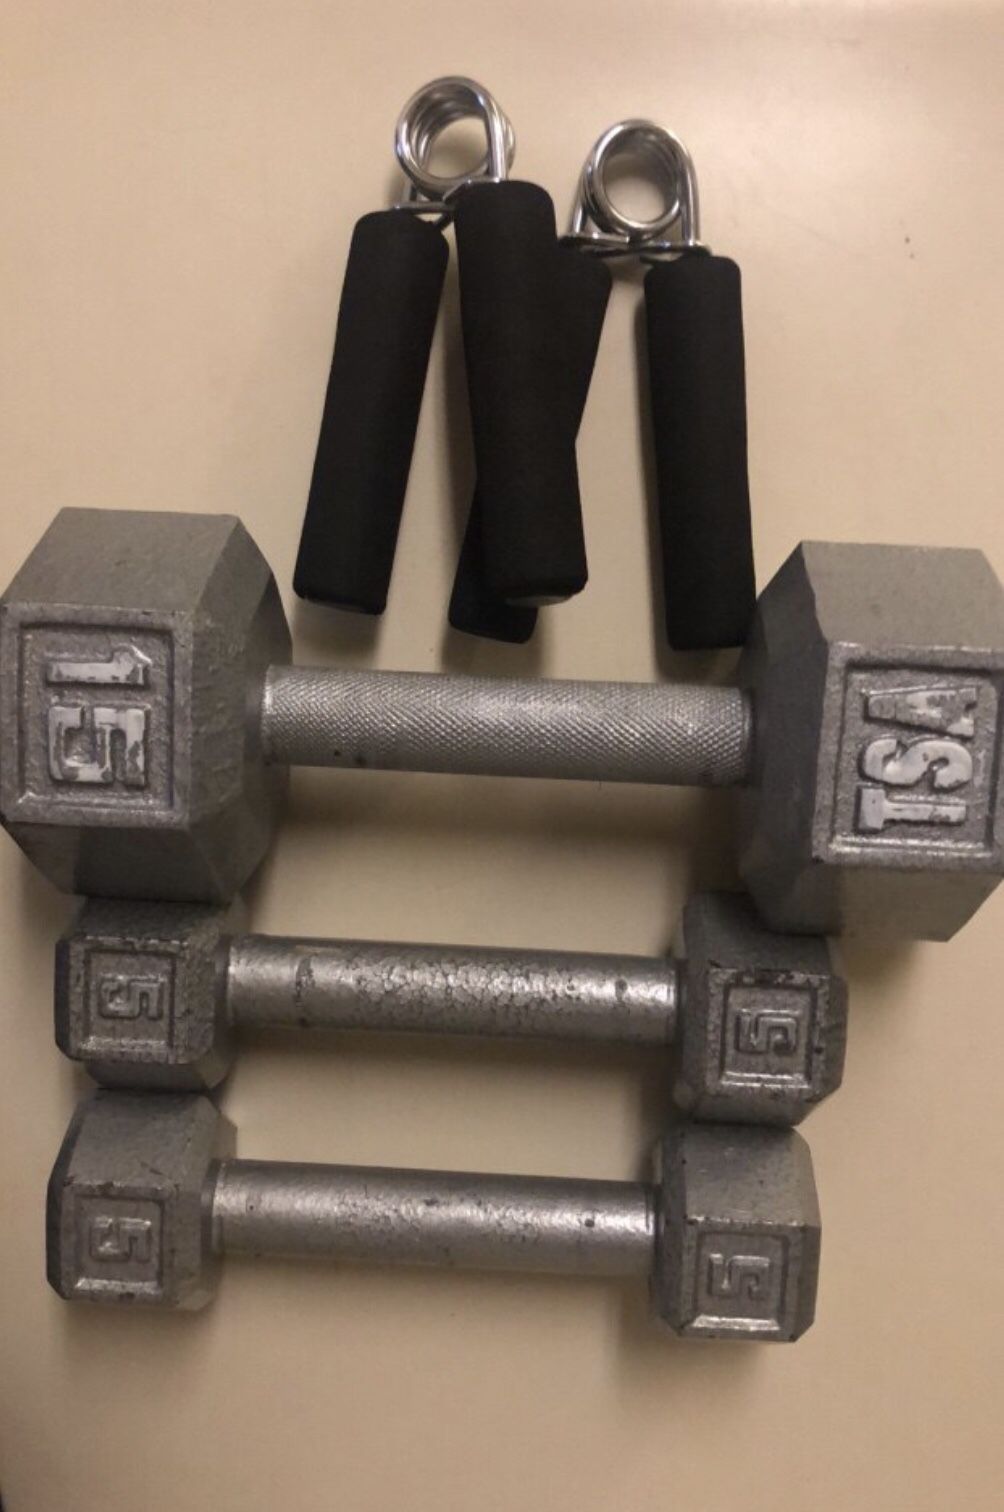 Weights/Grips